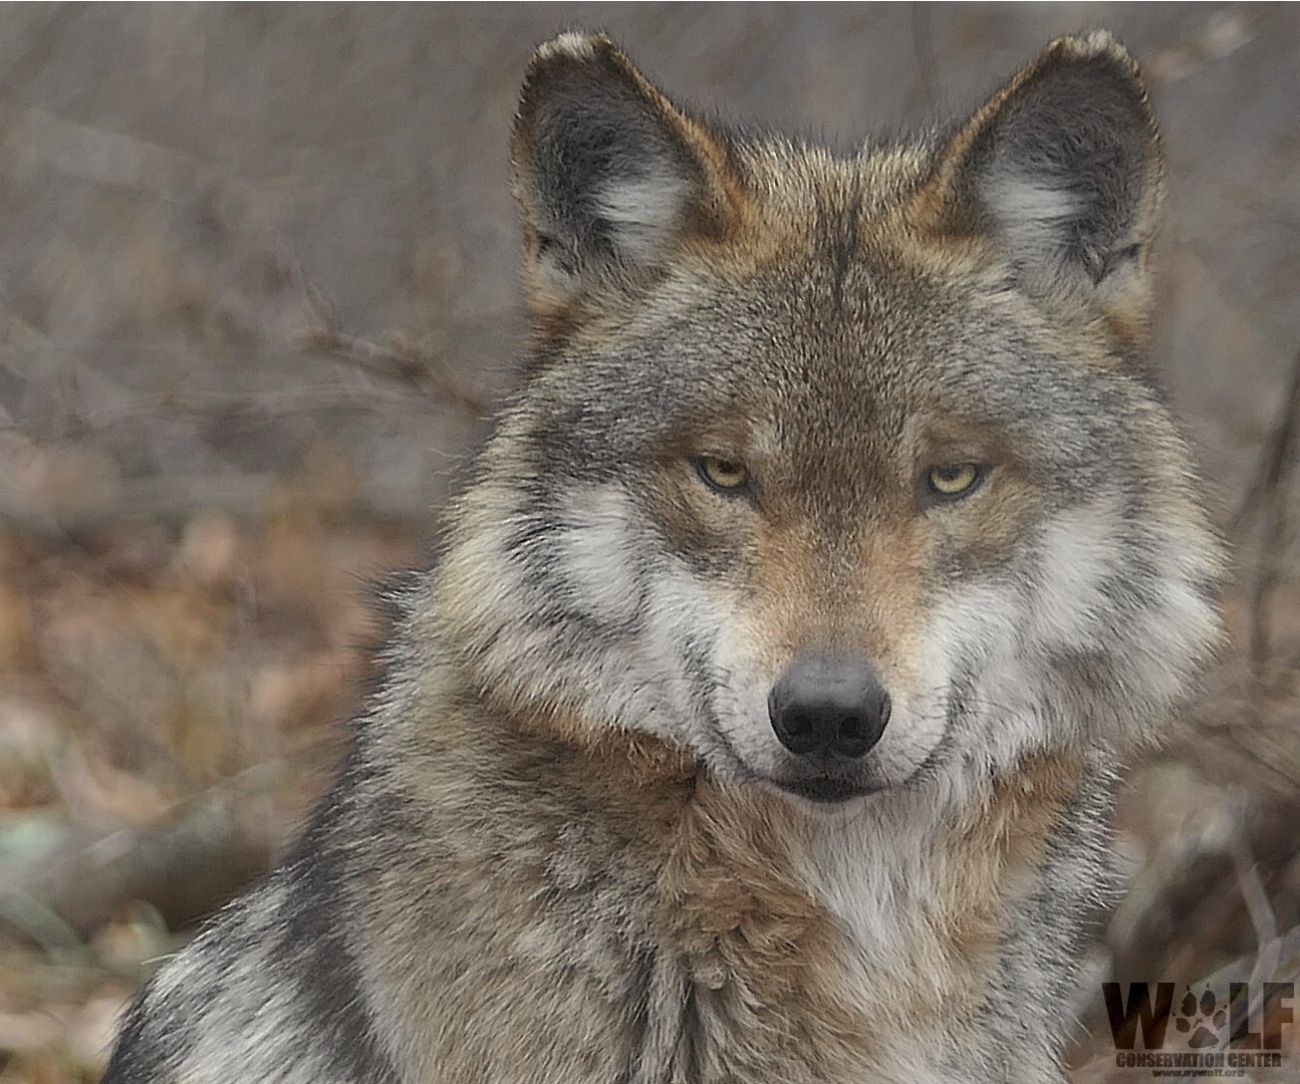 Mexican wolf killings expose a dark underbelly of western culture